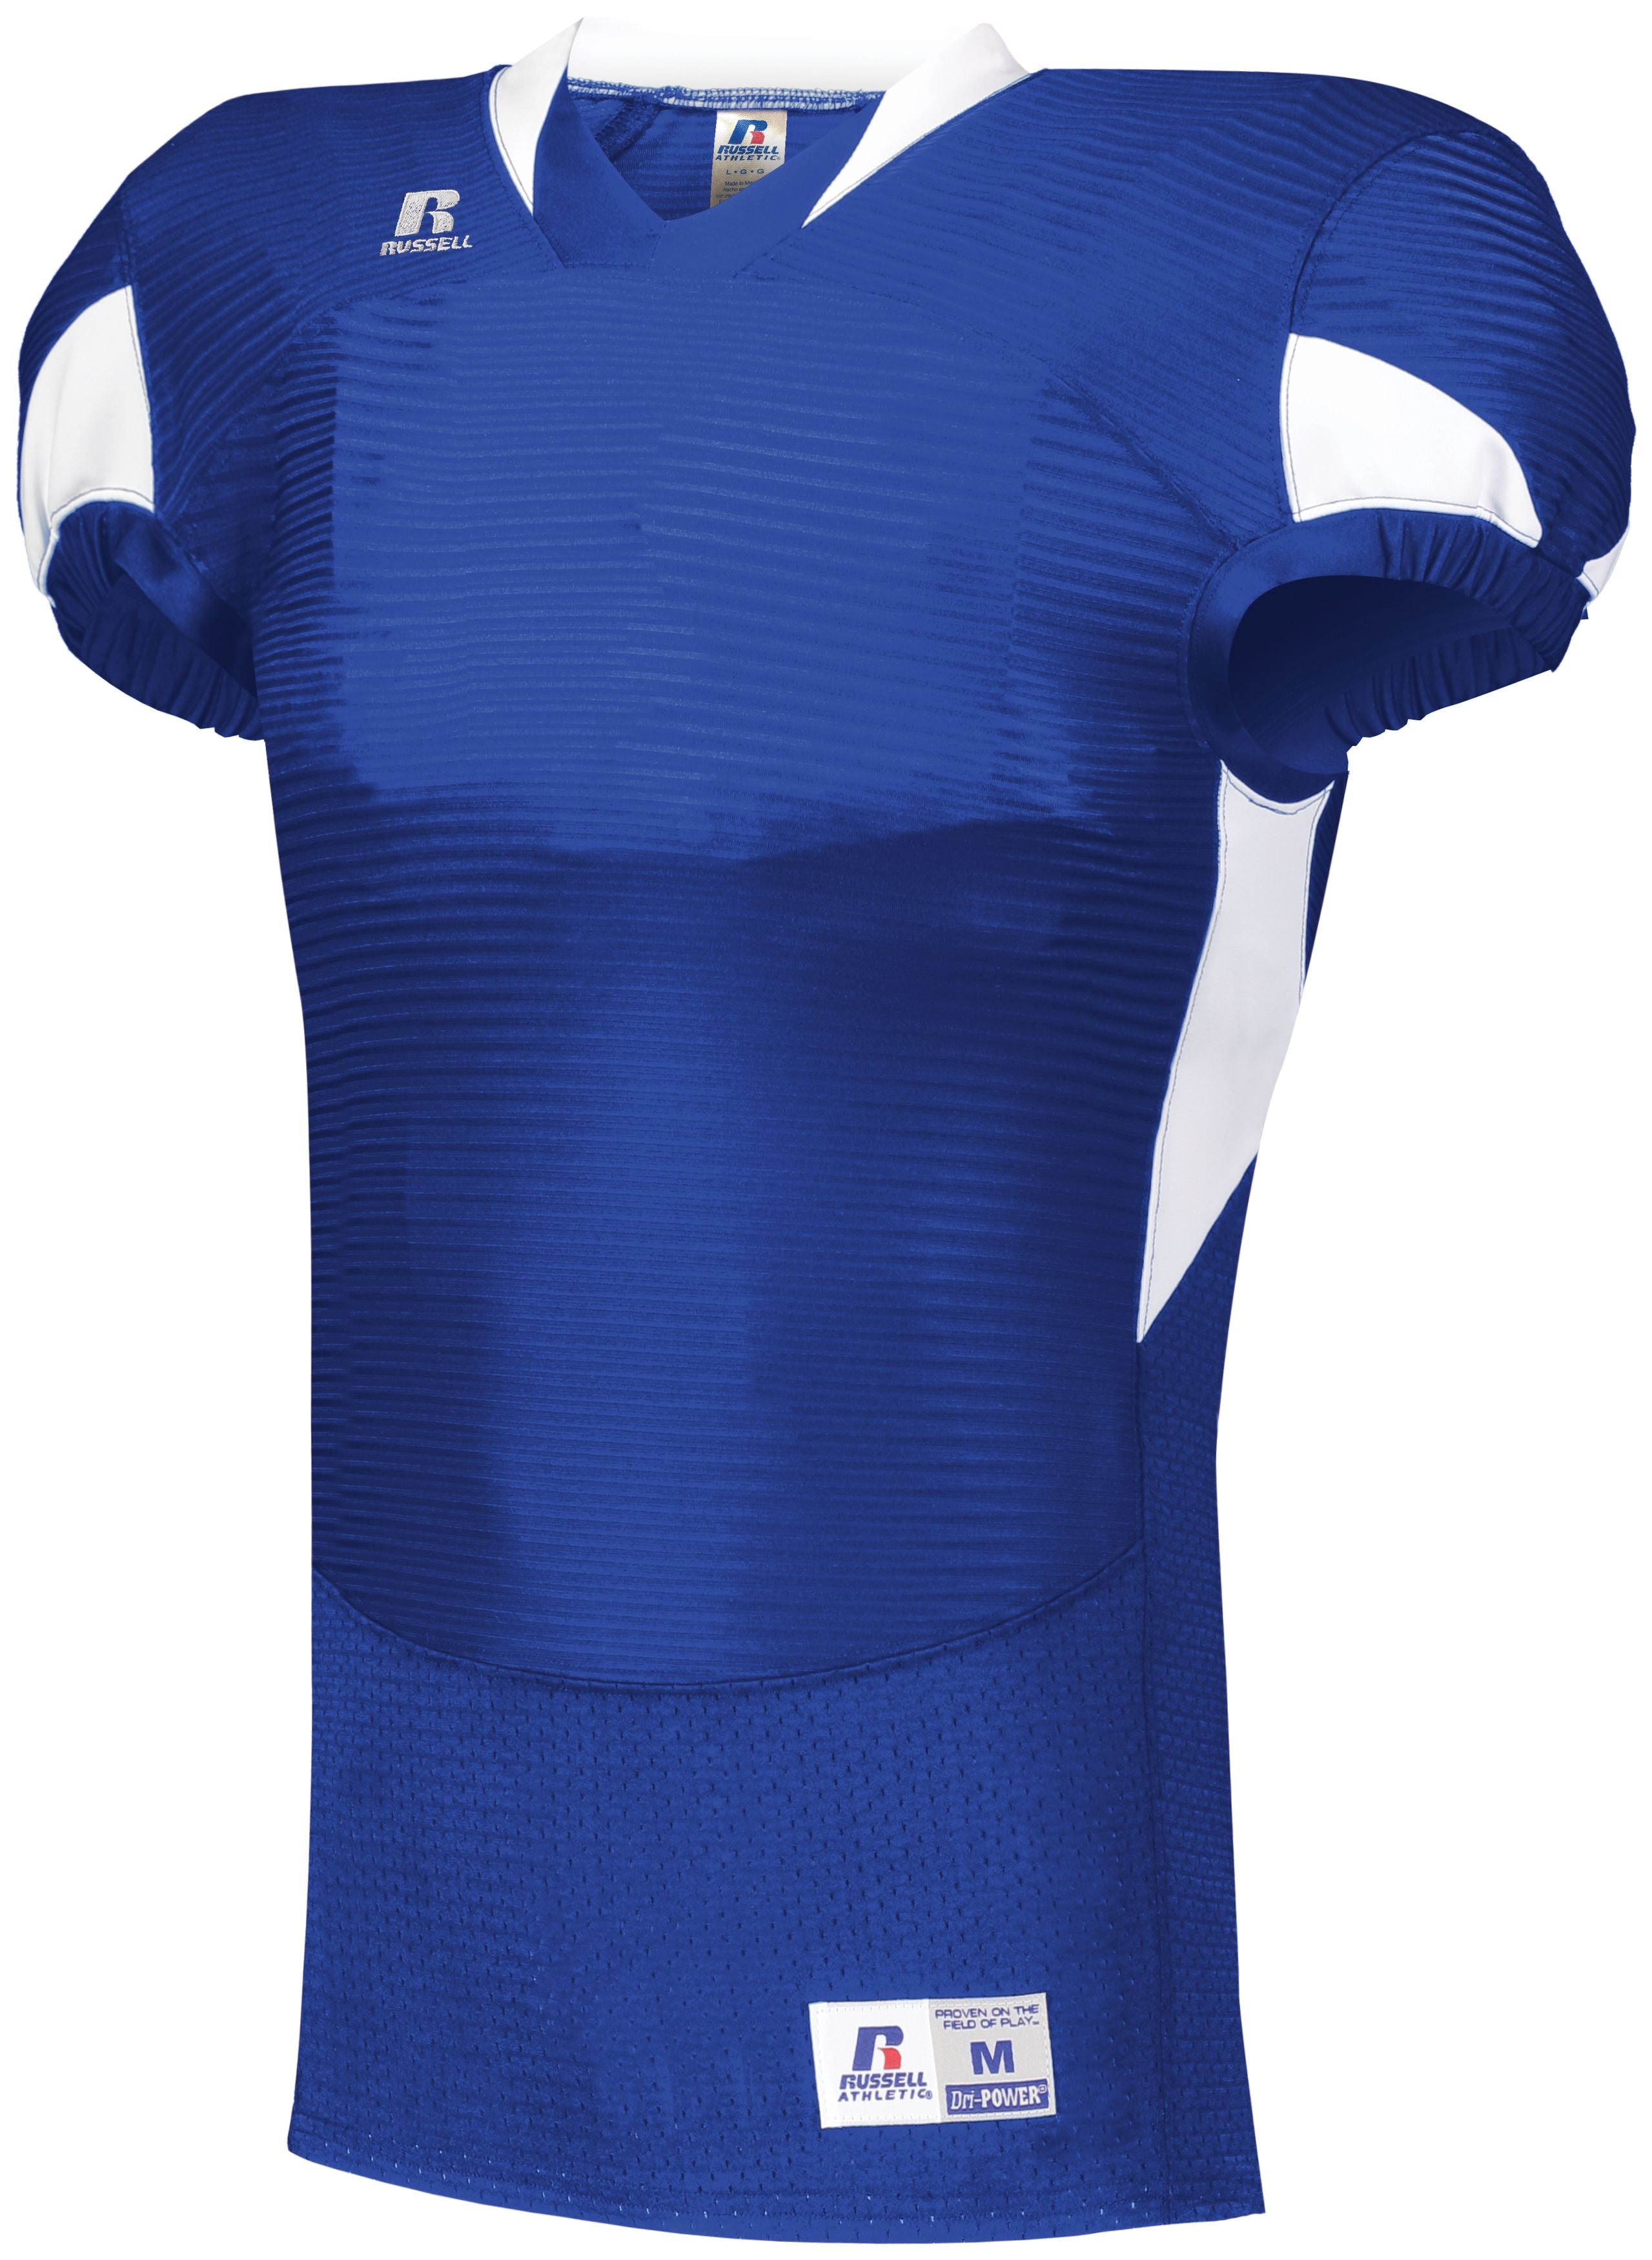 Russell Athletic Waist Length Football Jersey in Royal/White  -Part of the Adult, Adult-Jersey, Football, Russell-Athletic-Products, Shirts, All-Sports, All-Sports-1 product lines at KanaleyCreations.com